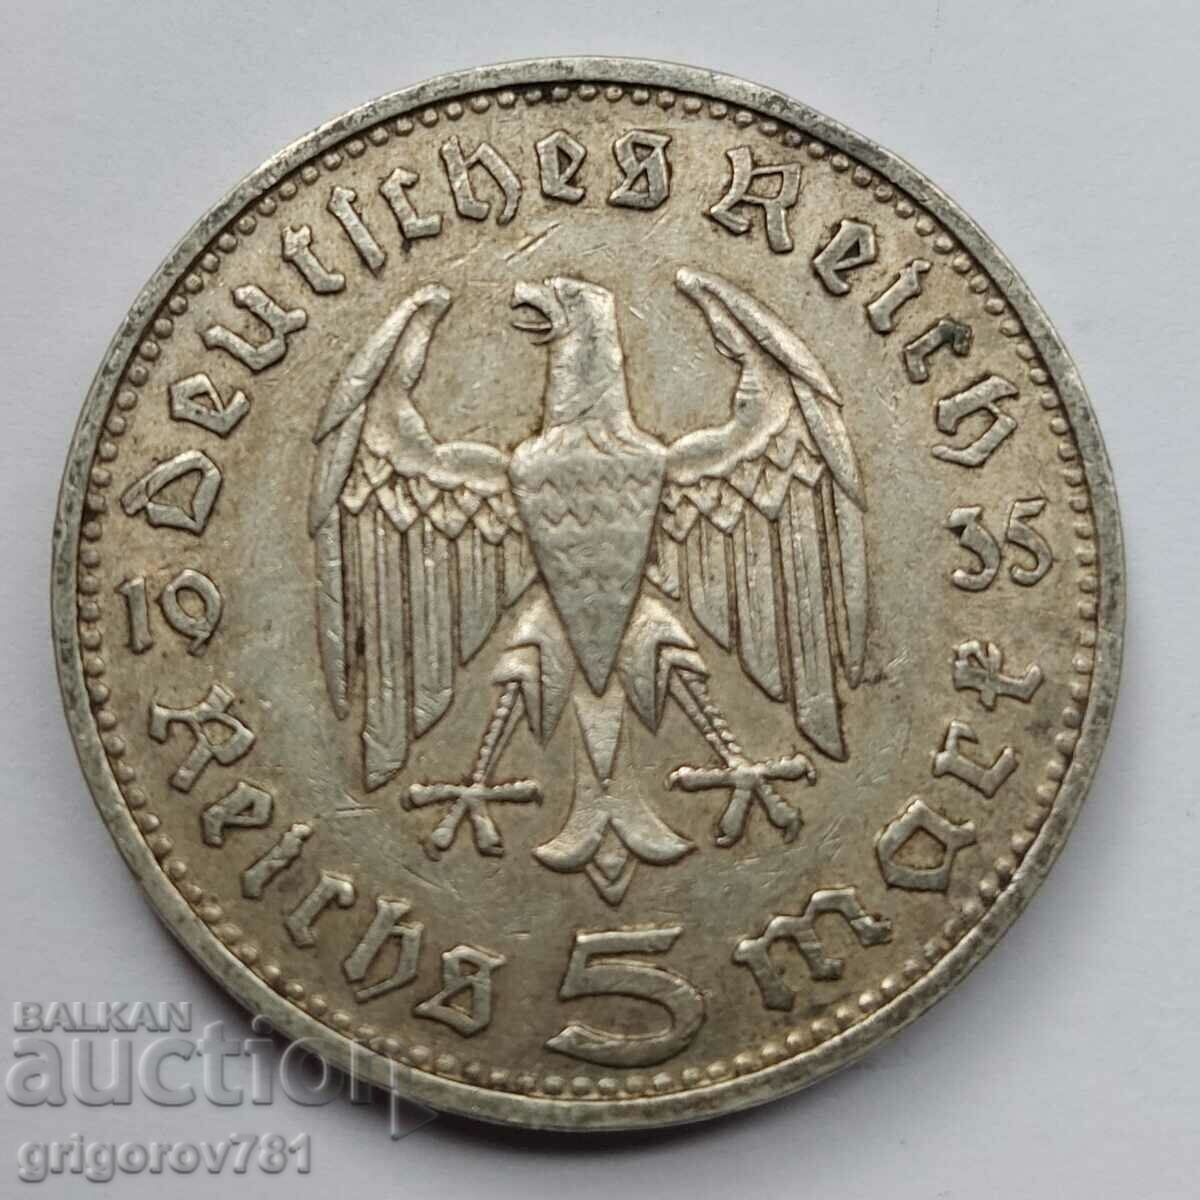 5 Mark Silver Germany 1935 D III Reich Silver Coin #67